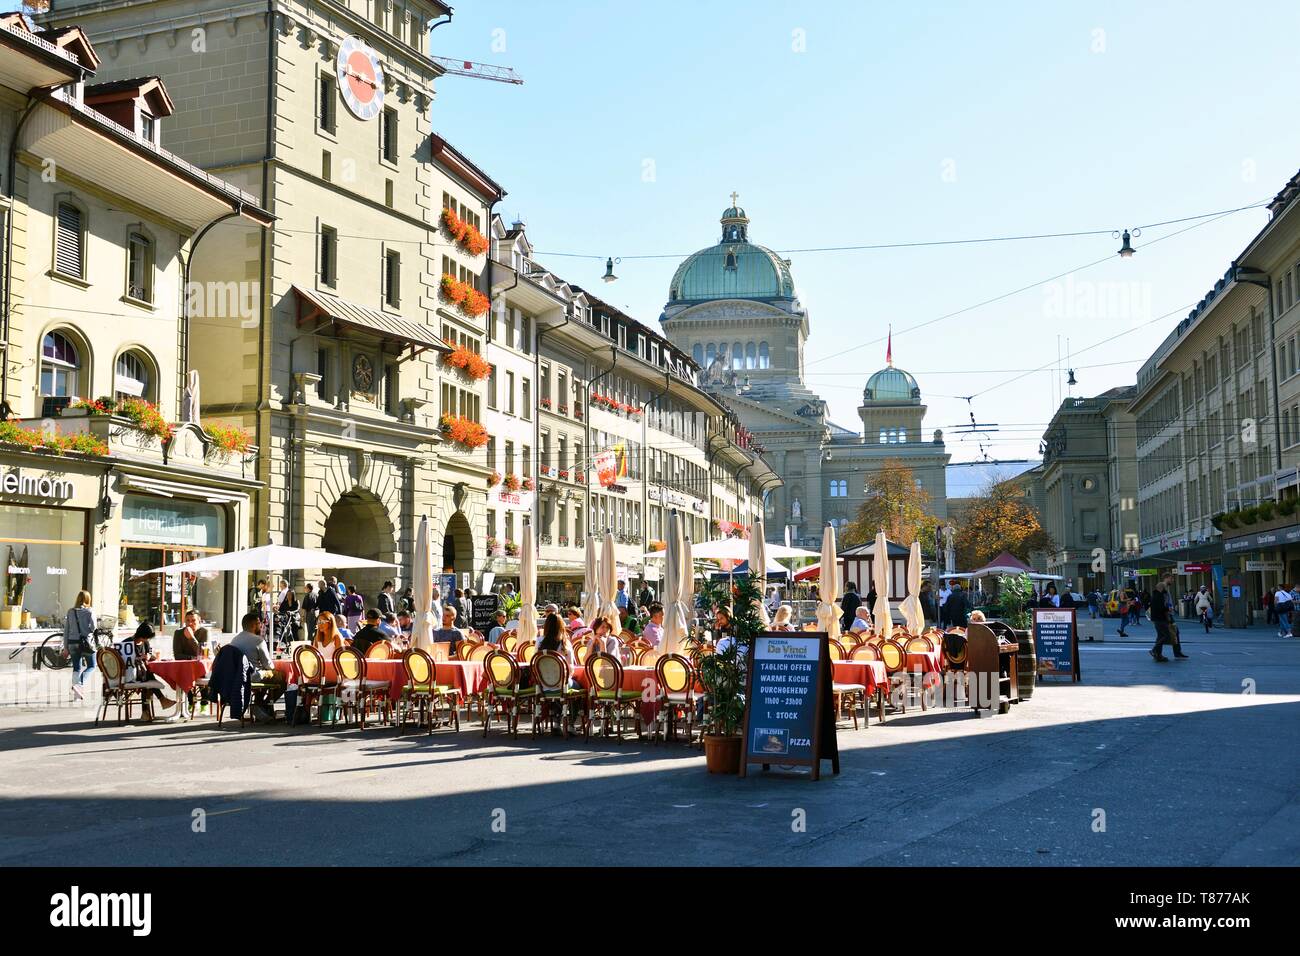 Switzerland, canton of Berne, Berne, the old town listed as World Heritage by UNESCO, Waisenhausplatz, Käfigturm (Prison Tower) and the Federal Palace (Bundeshaus) in the background Stock Photo